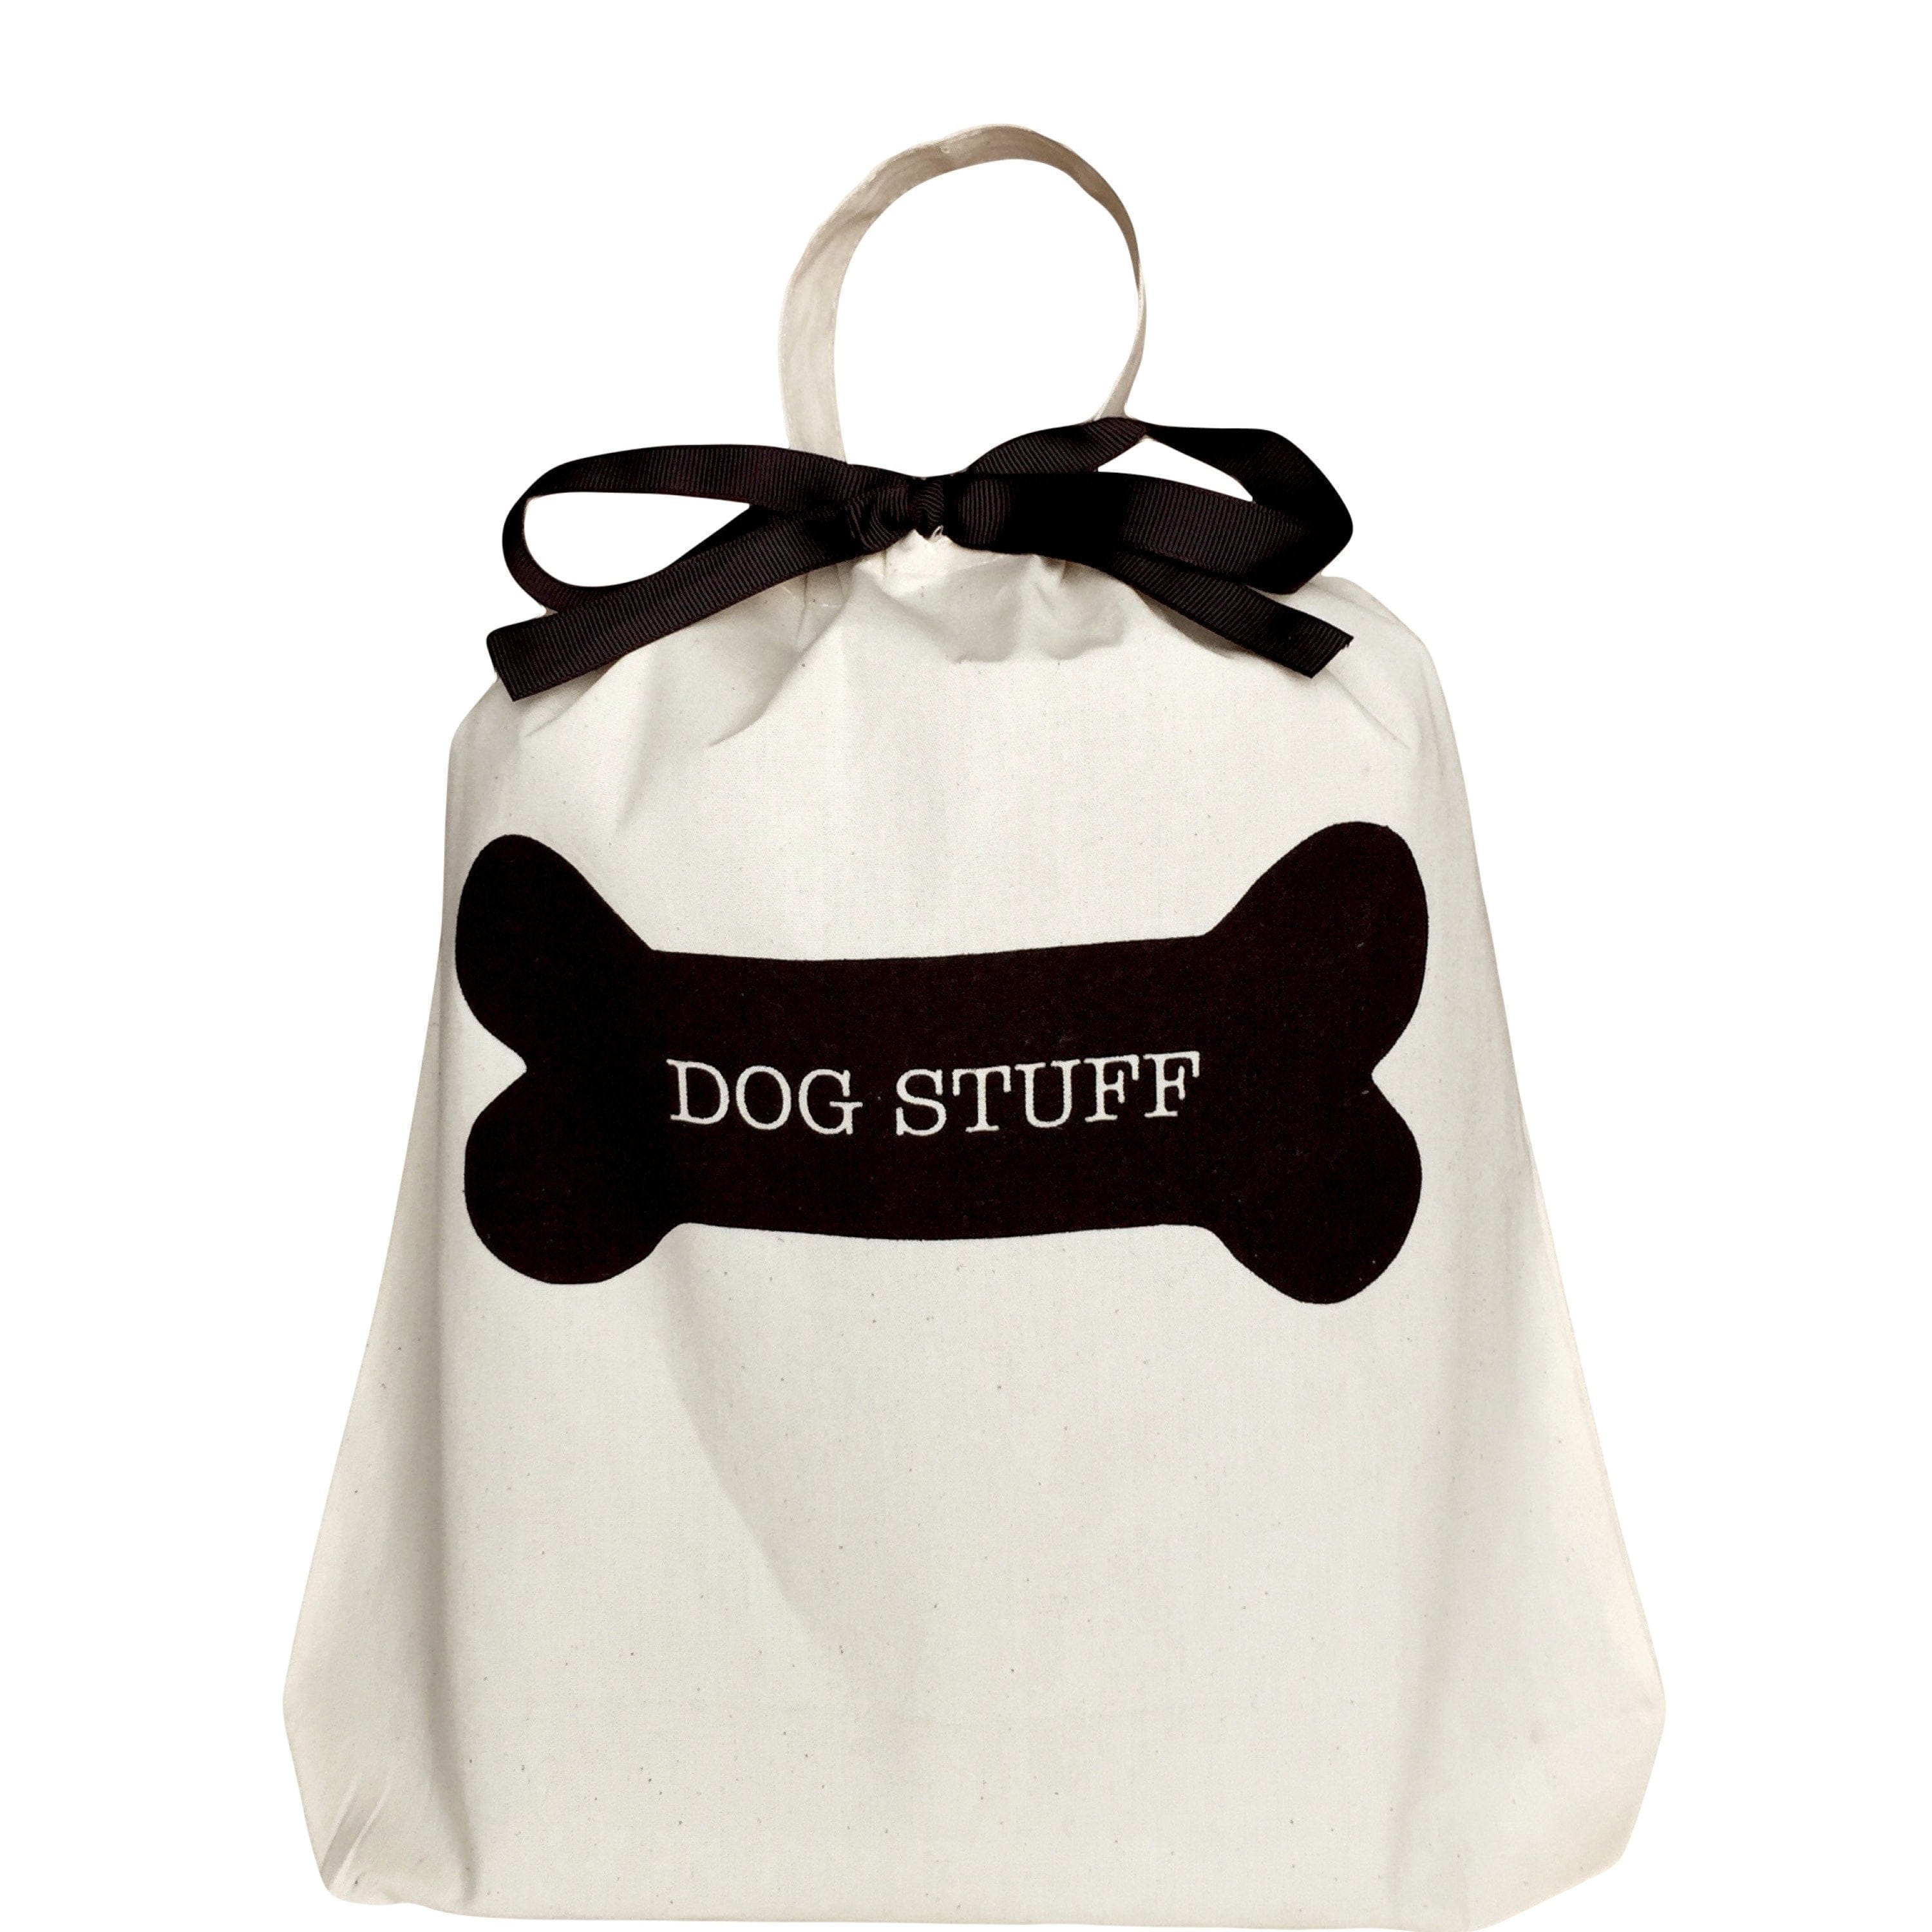 Organizing bag for dogs labeled "dog stuff" 